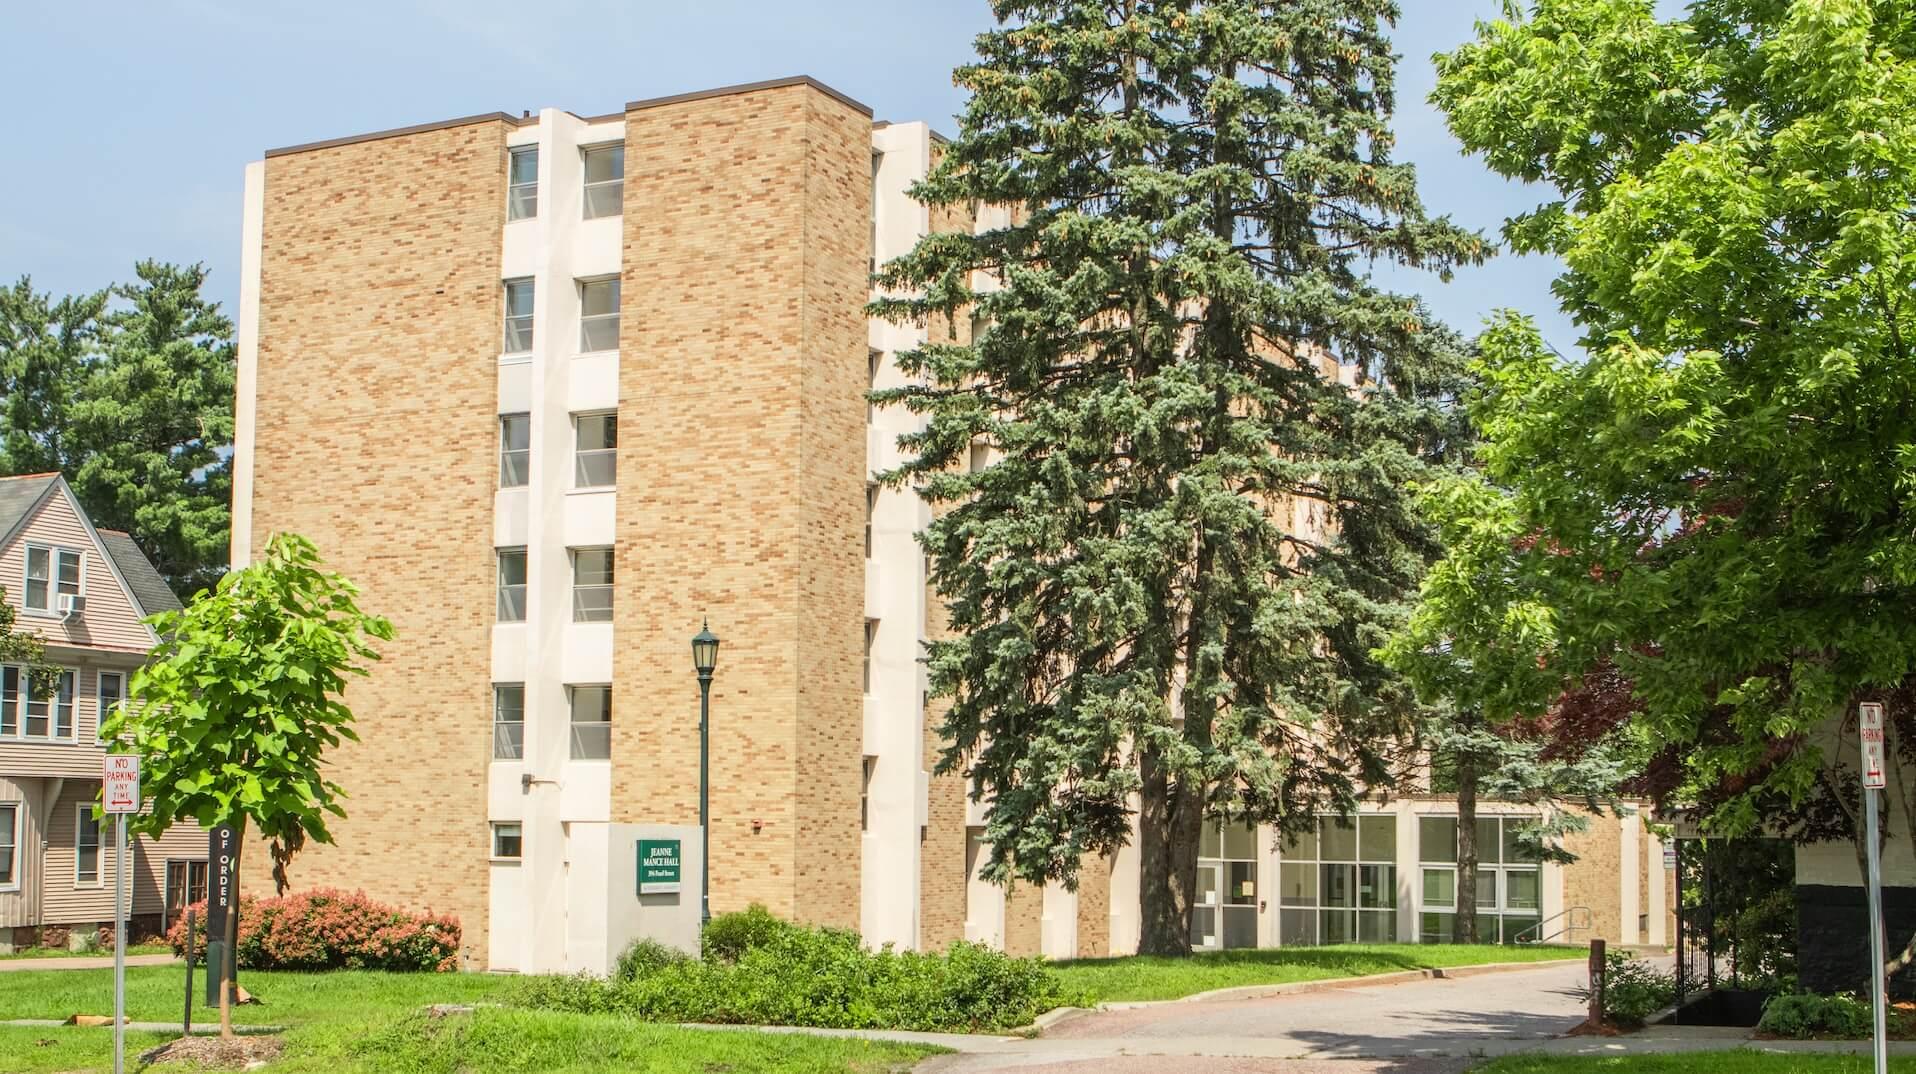 A six-story brick and concrete residence hall with trees beside it. 